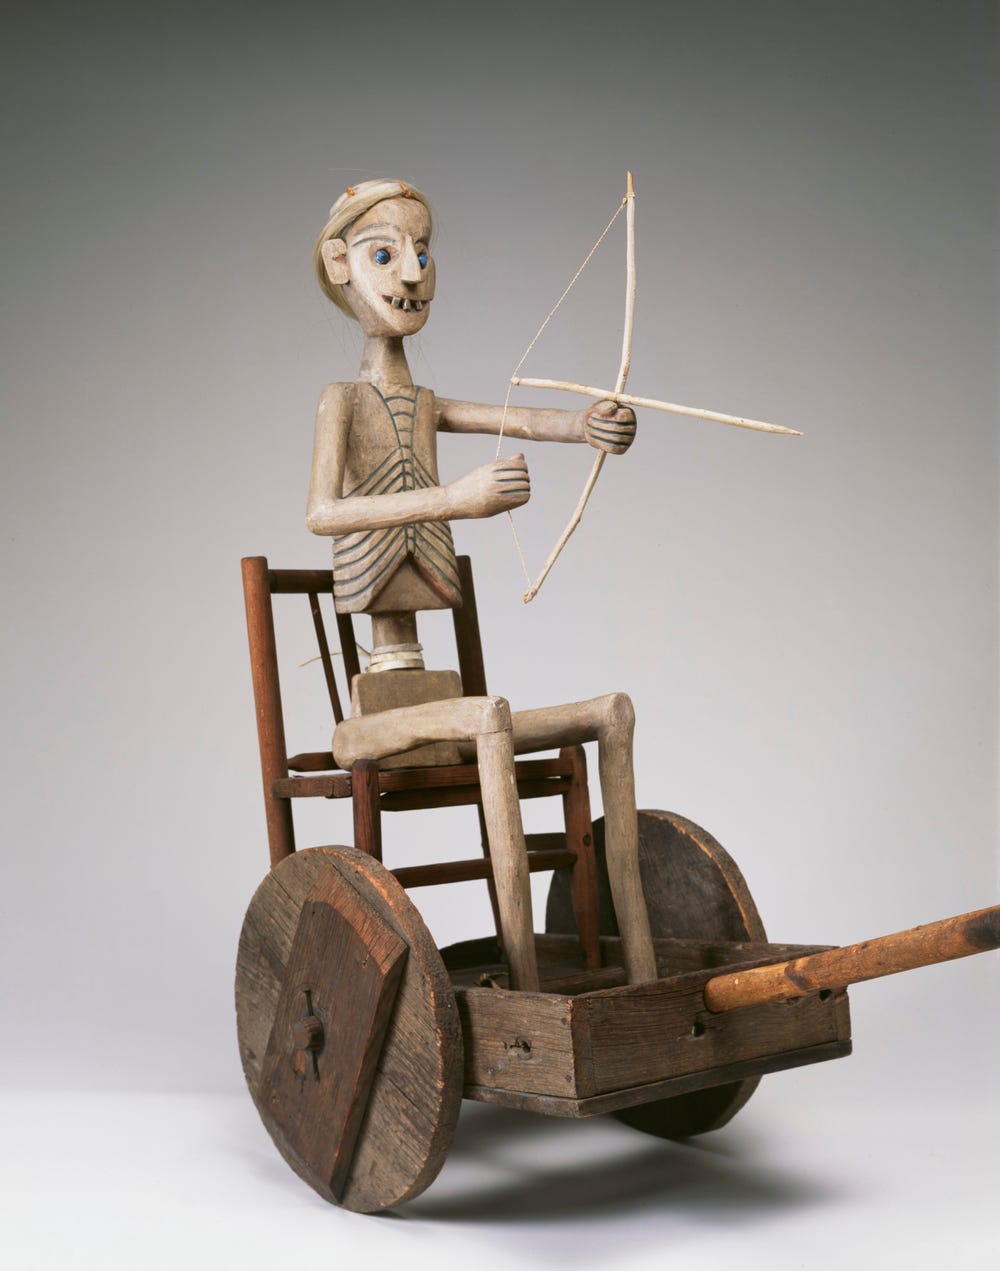 sculpture of a skeletal figure on a cart holding a bow and arrow